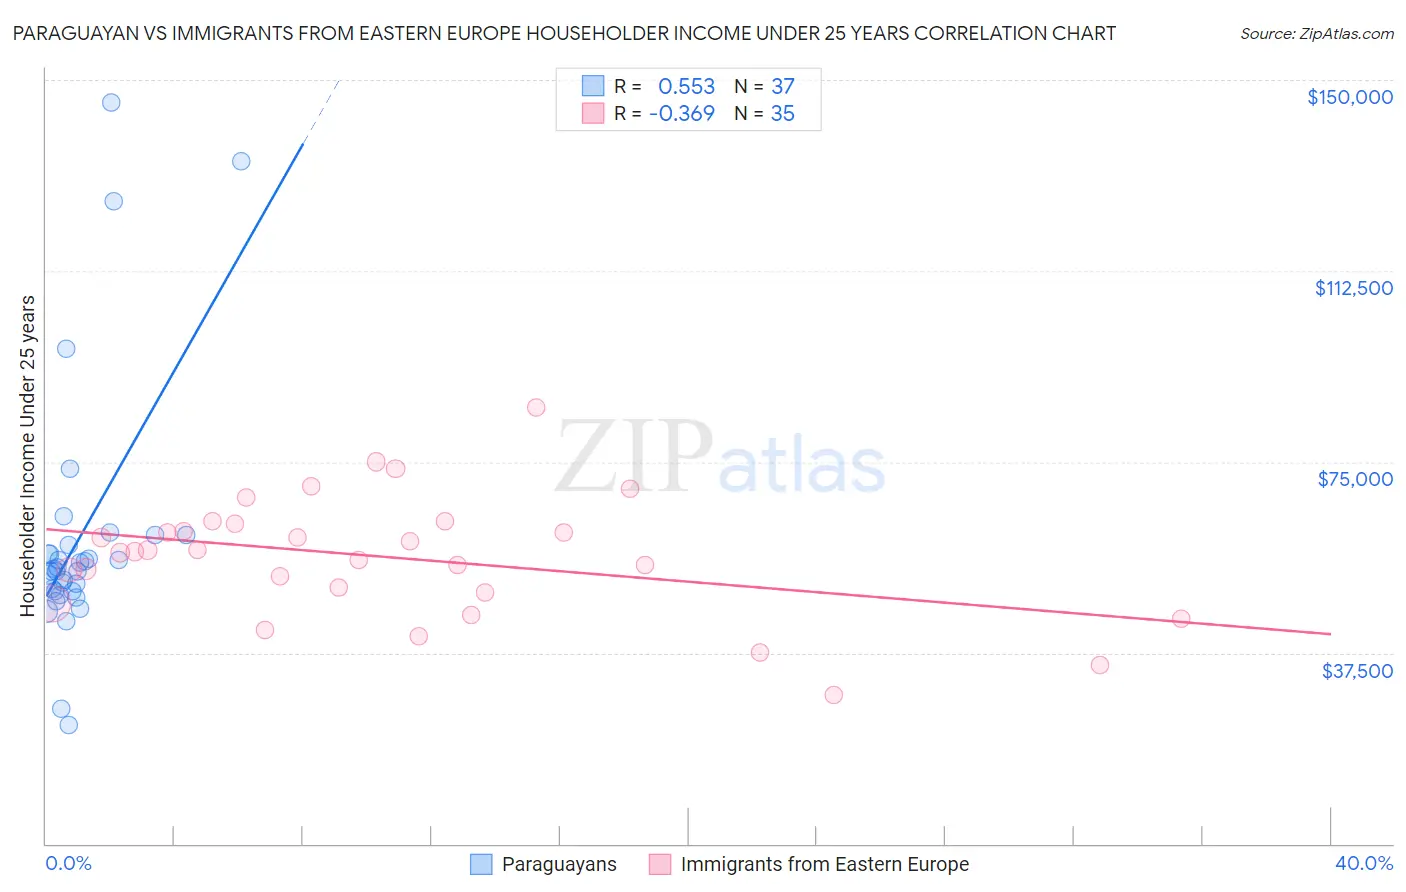 Paraguayan vs Immigrants from Eastern Europe Householder Income Under 25 years